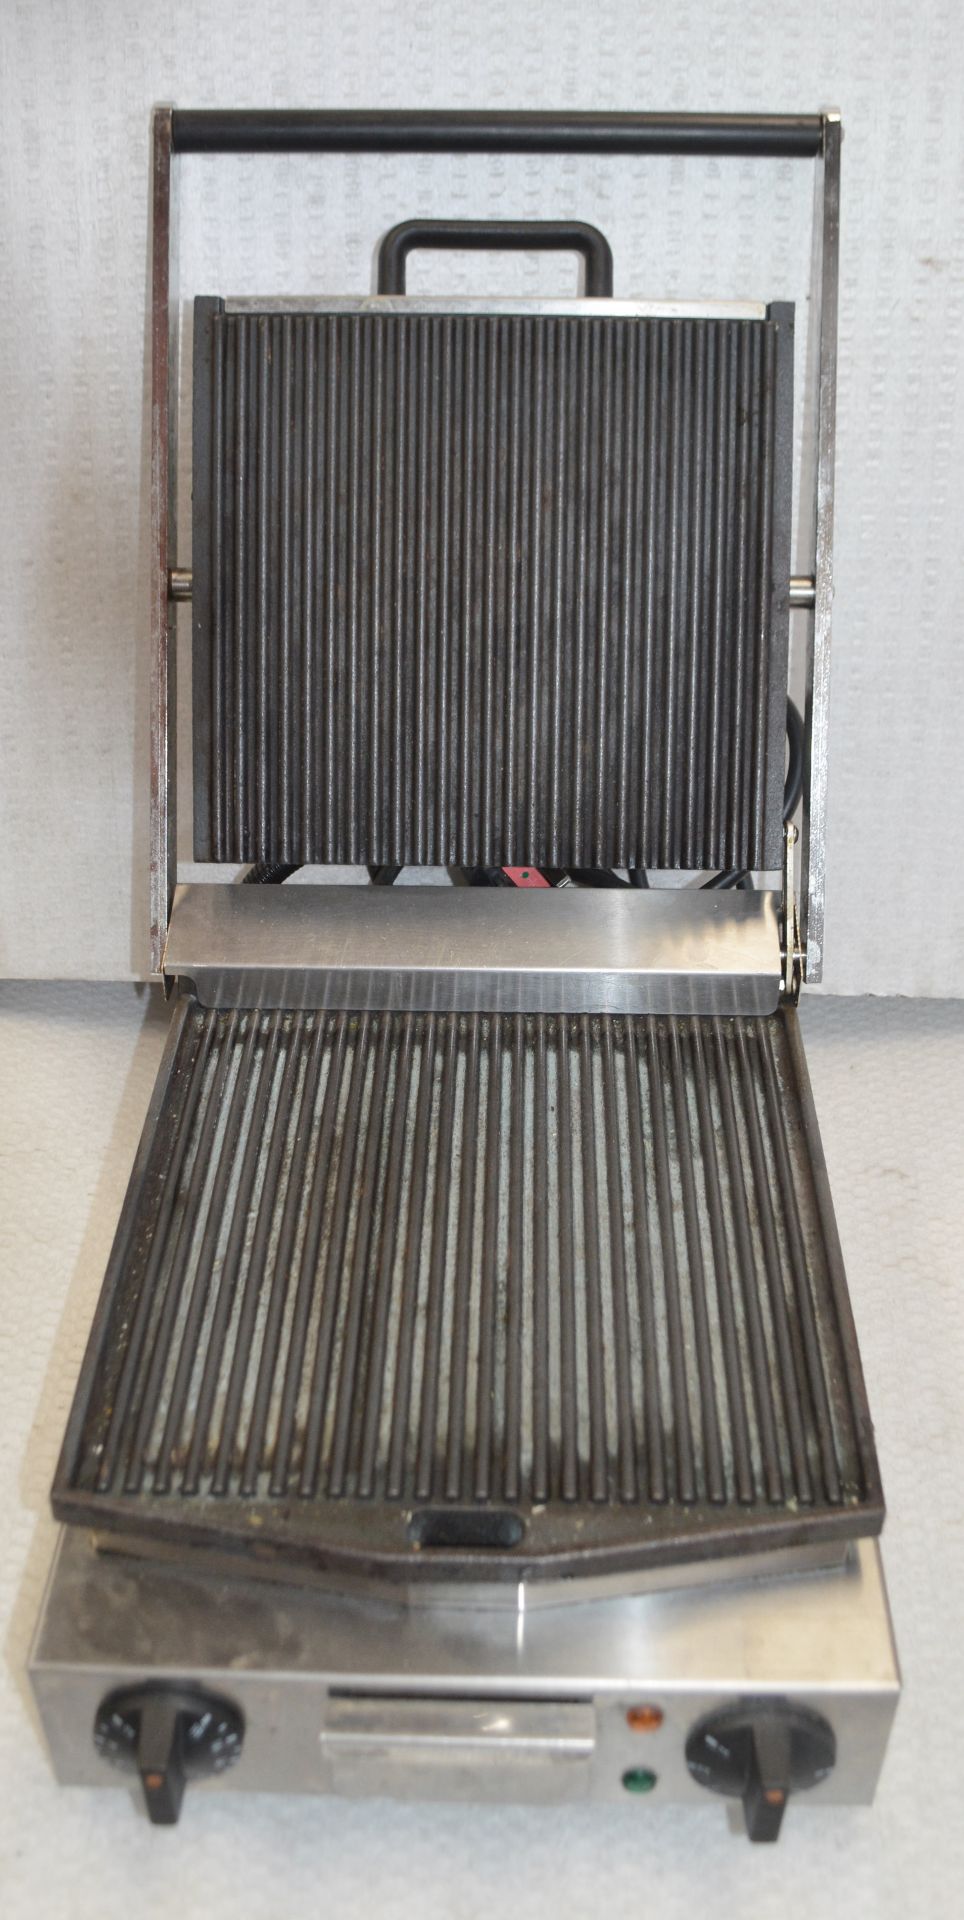 1 x Lincat Electric Contact Panini Grill For Commercial Catering Kitchens - Recently Removed From - Image 3 of 3